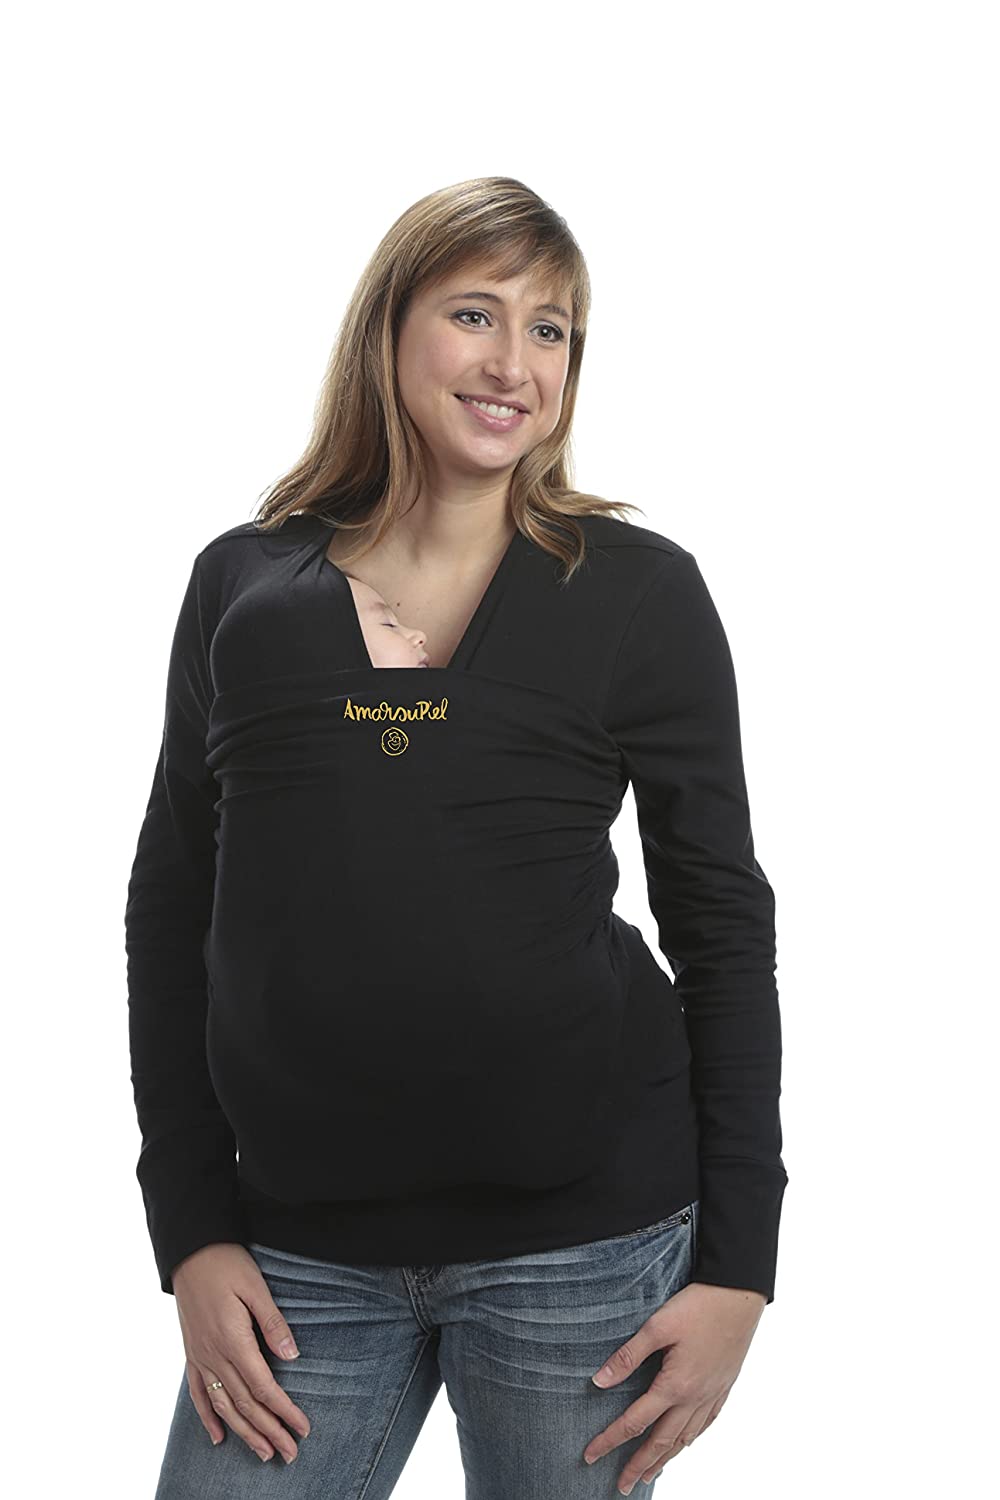 Amarsupiel Mujeres Long-Sleeved Shirt with Integrated Baby Carrier XL Black